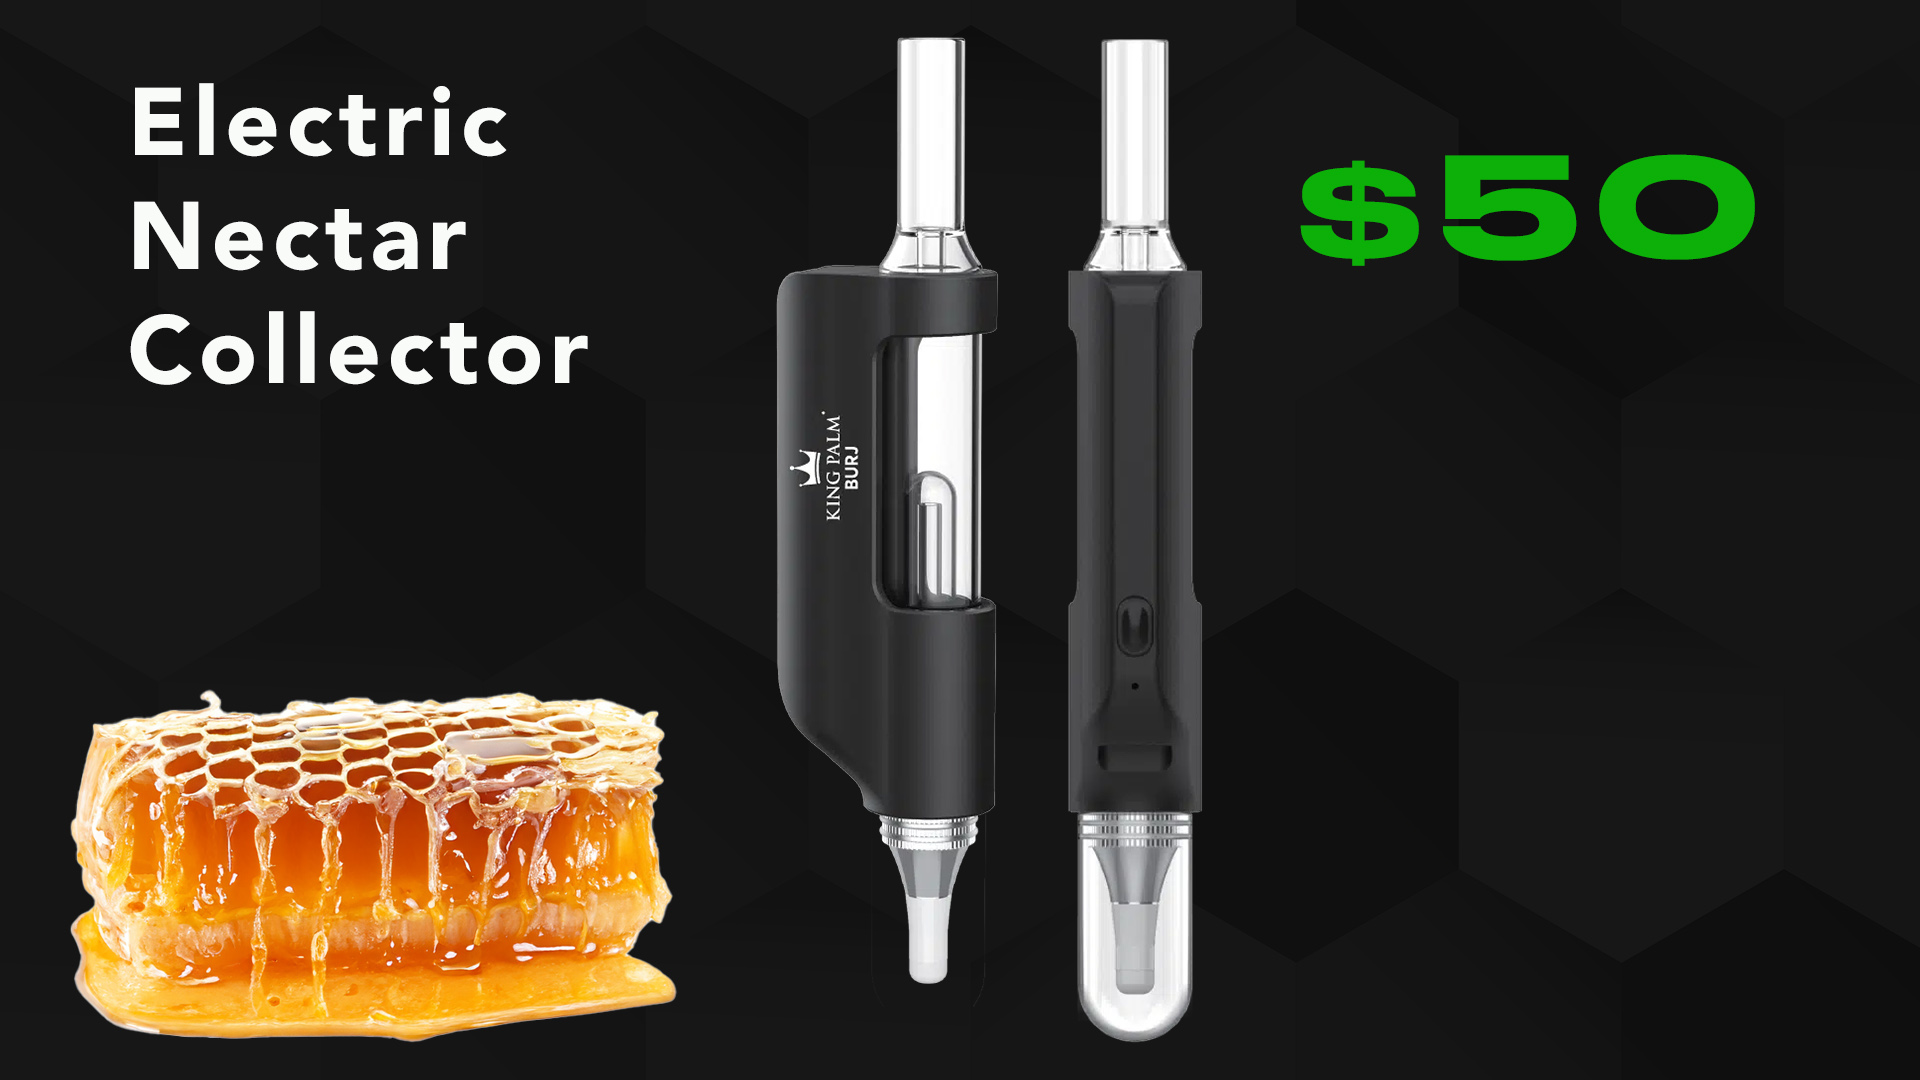 The Best Electric Nectar Collector for Sale $50 - KingPalm